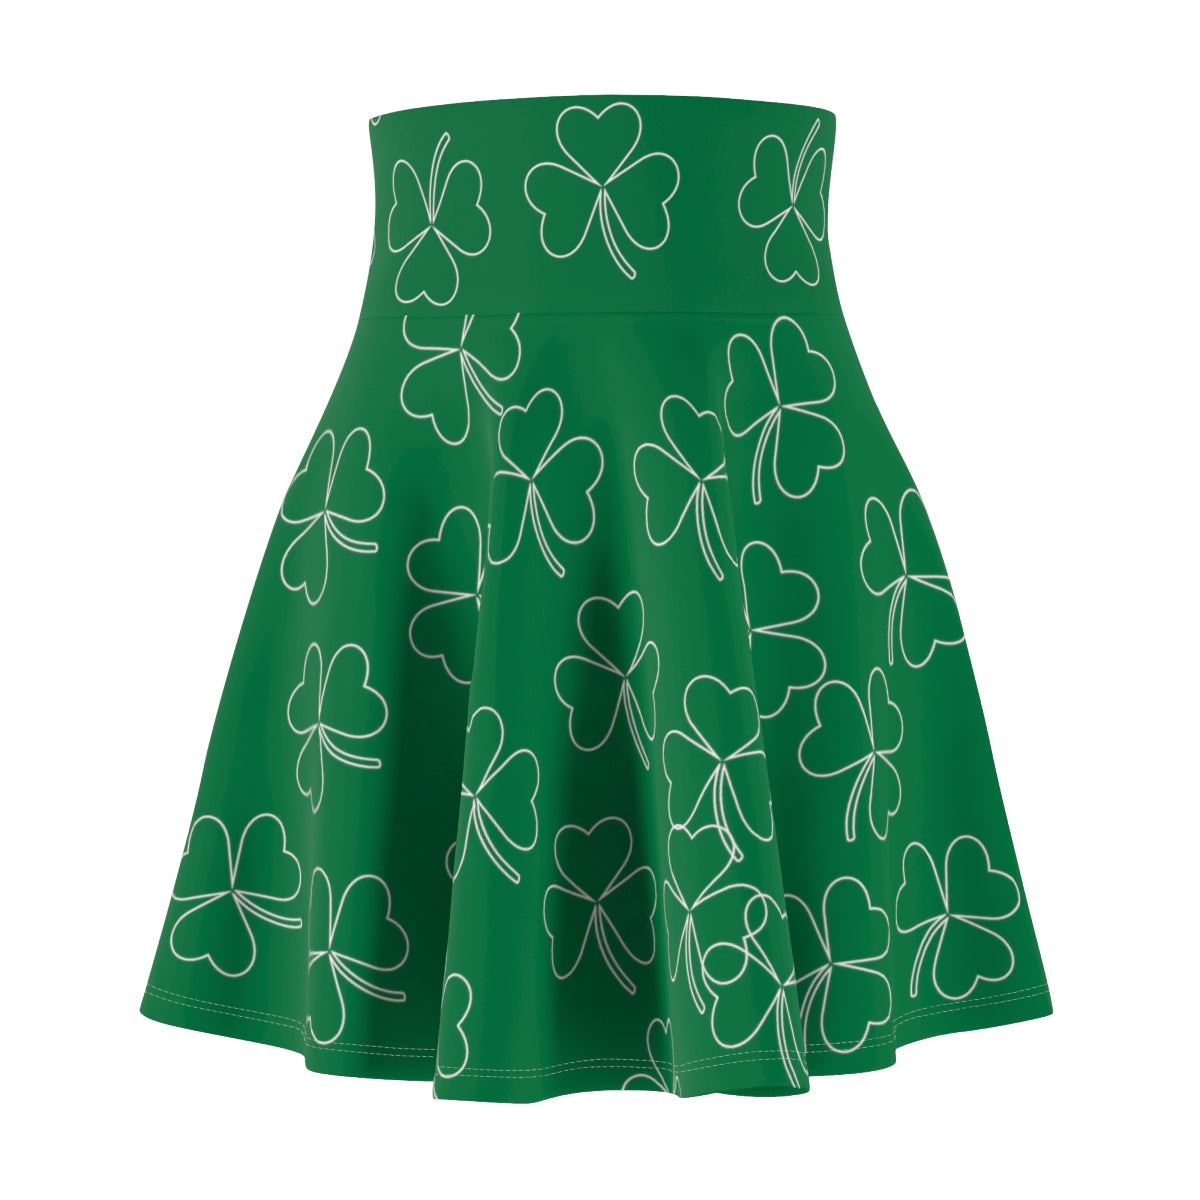 Personalized products to celebrate Saint Patrick's day